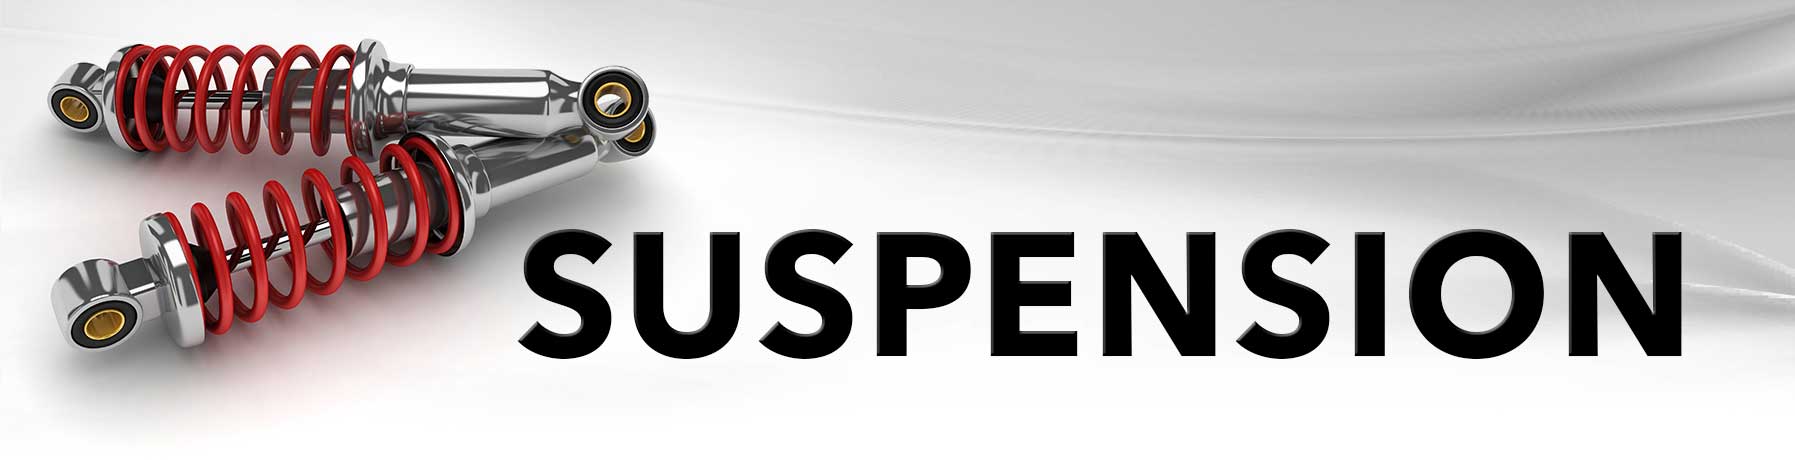 Suspension repair banner image with picture of suspension components